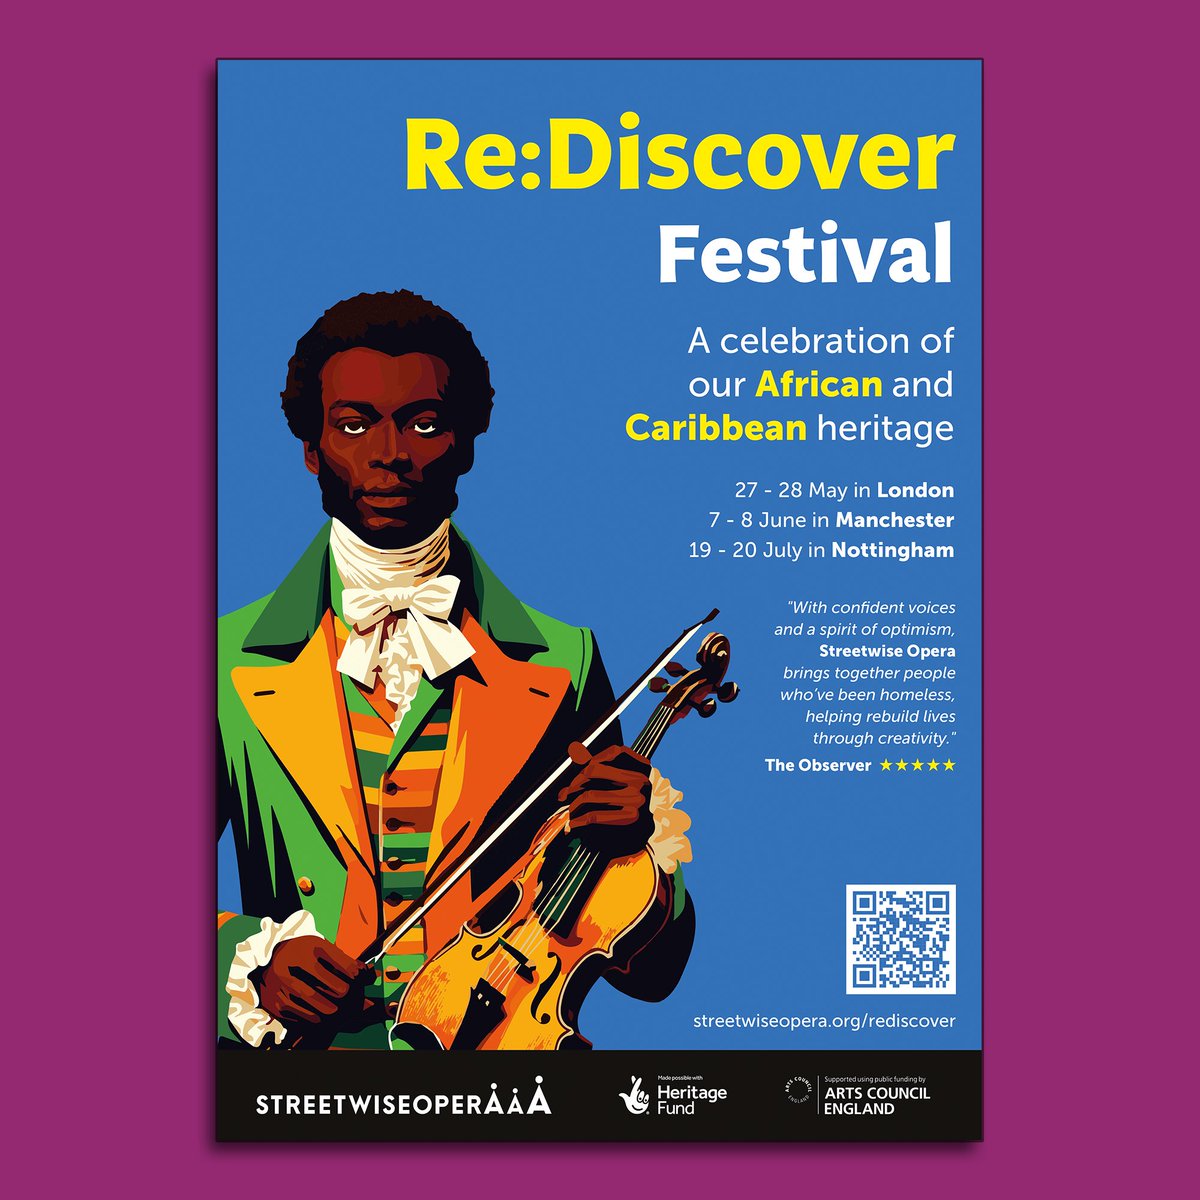 Tickets for the Re:Discover Festival are going fast! Make sure to book yours soon. 27-28 May at @stjohnswaterloo, 7-8 June at @BridgewaterHall and 19-20 July at @NottmPlayhouse. Join us for an exciting celebration of African and Caribbean heritage ⬇️ streetwiseopera.org/projects/redis…